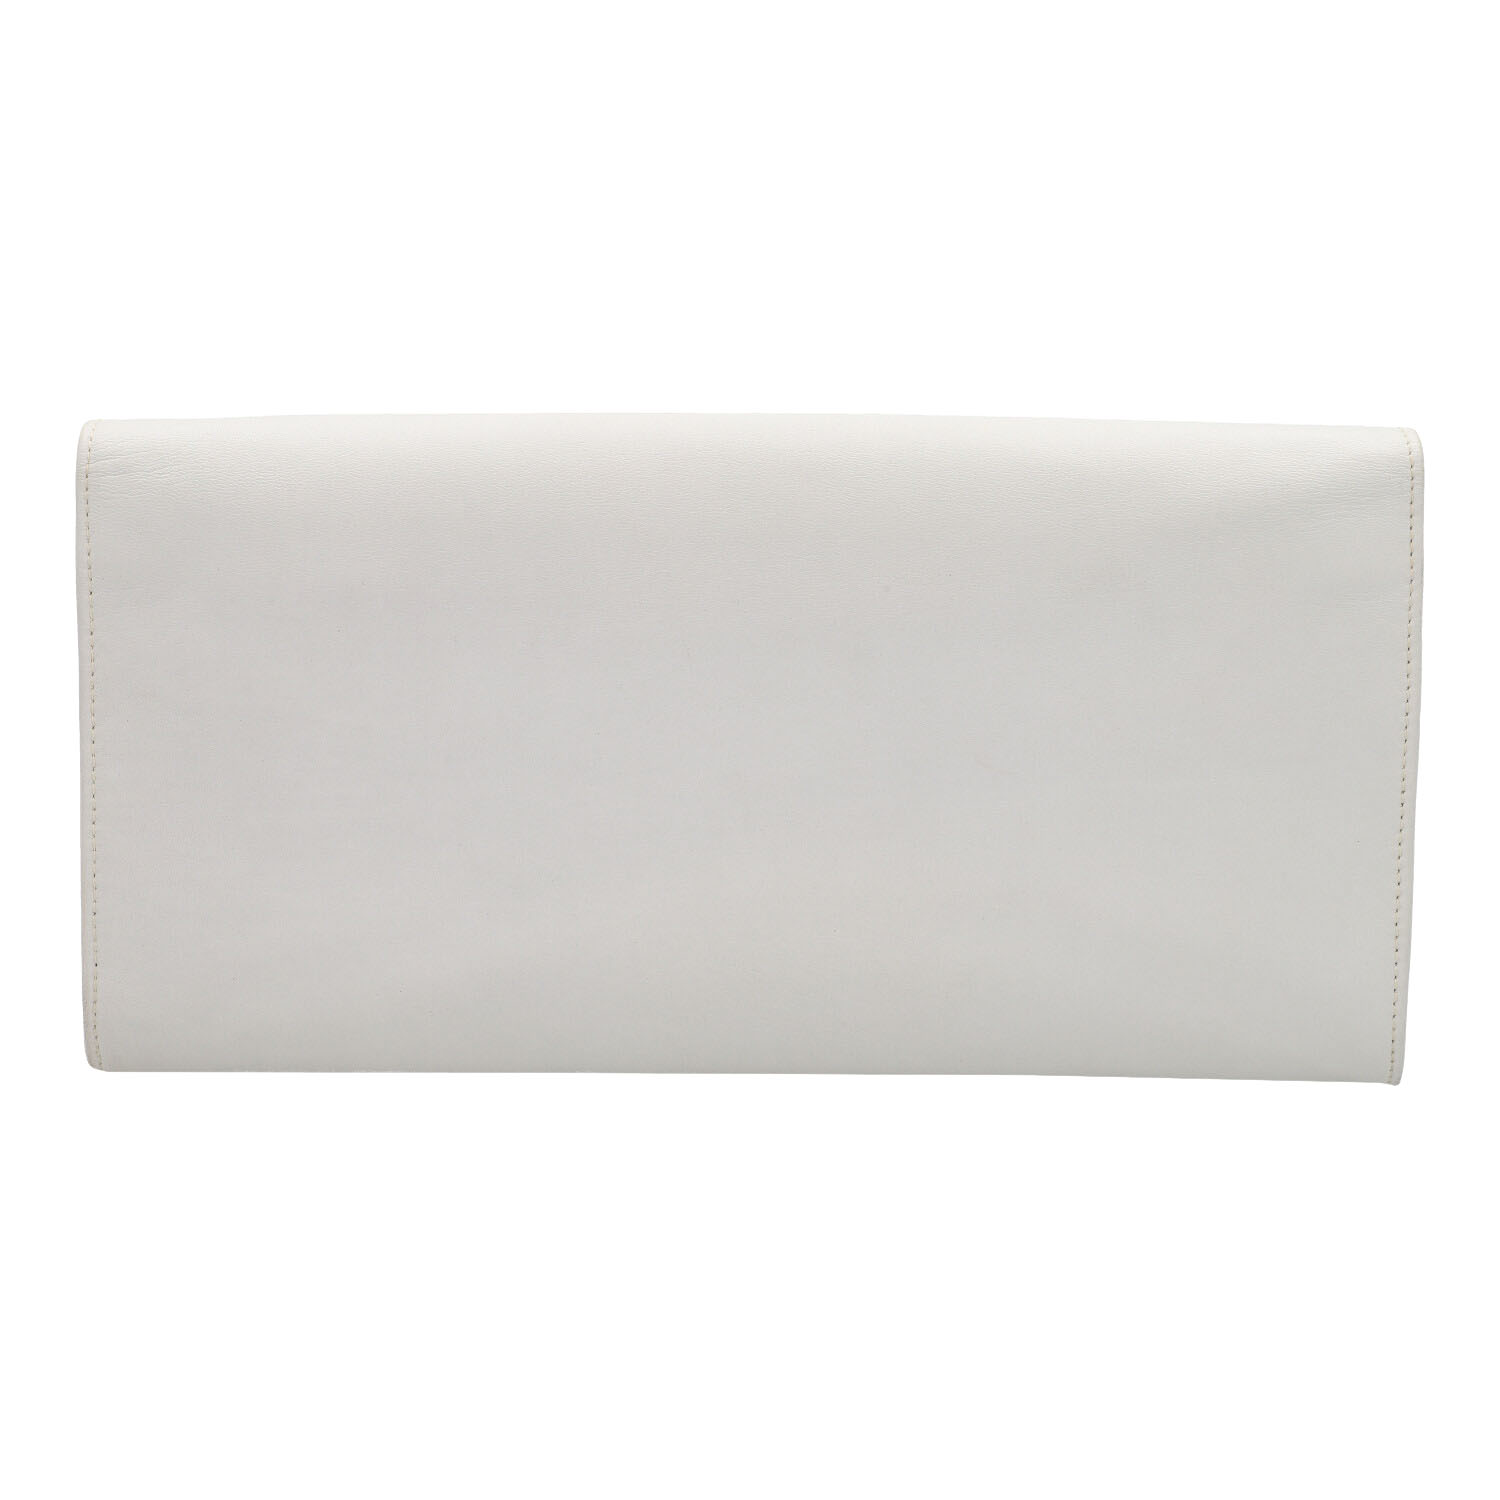 GIANNI VERSACE VINTAGE Clutch. - Image 4 of 6